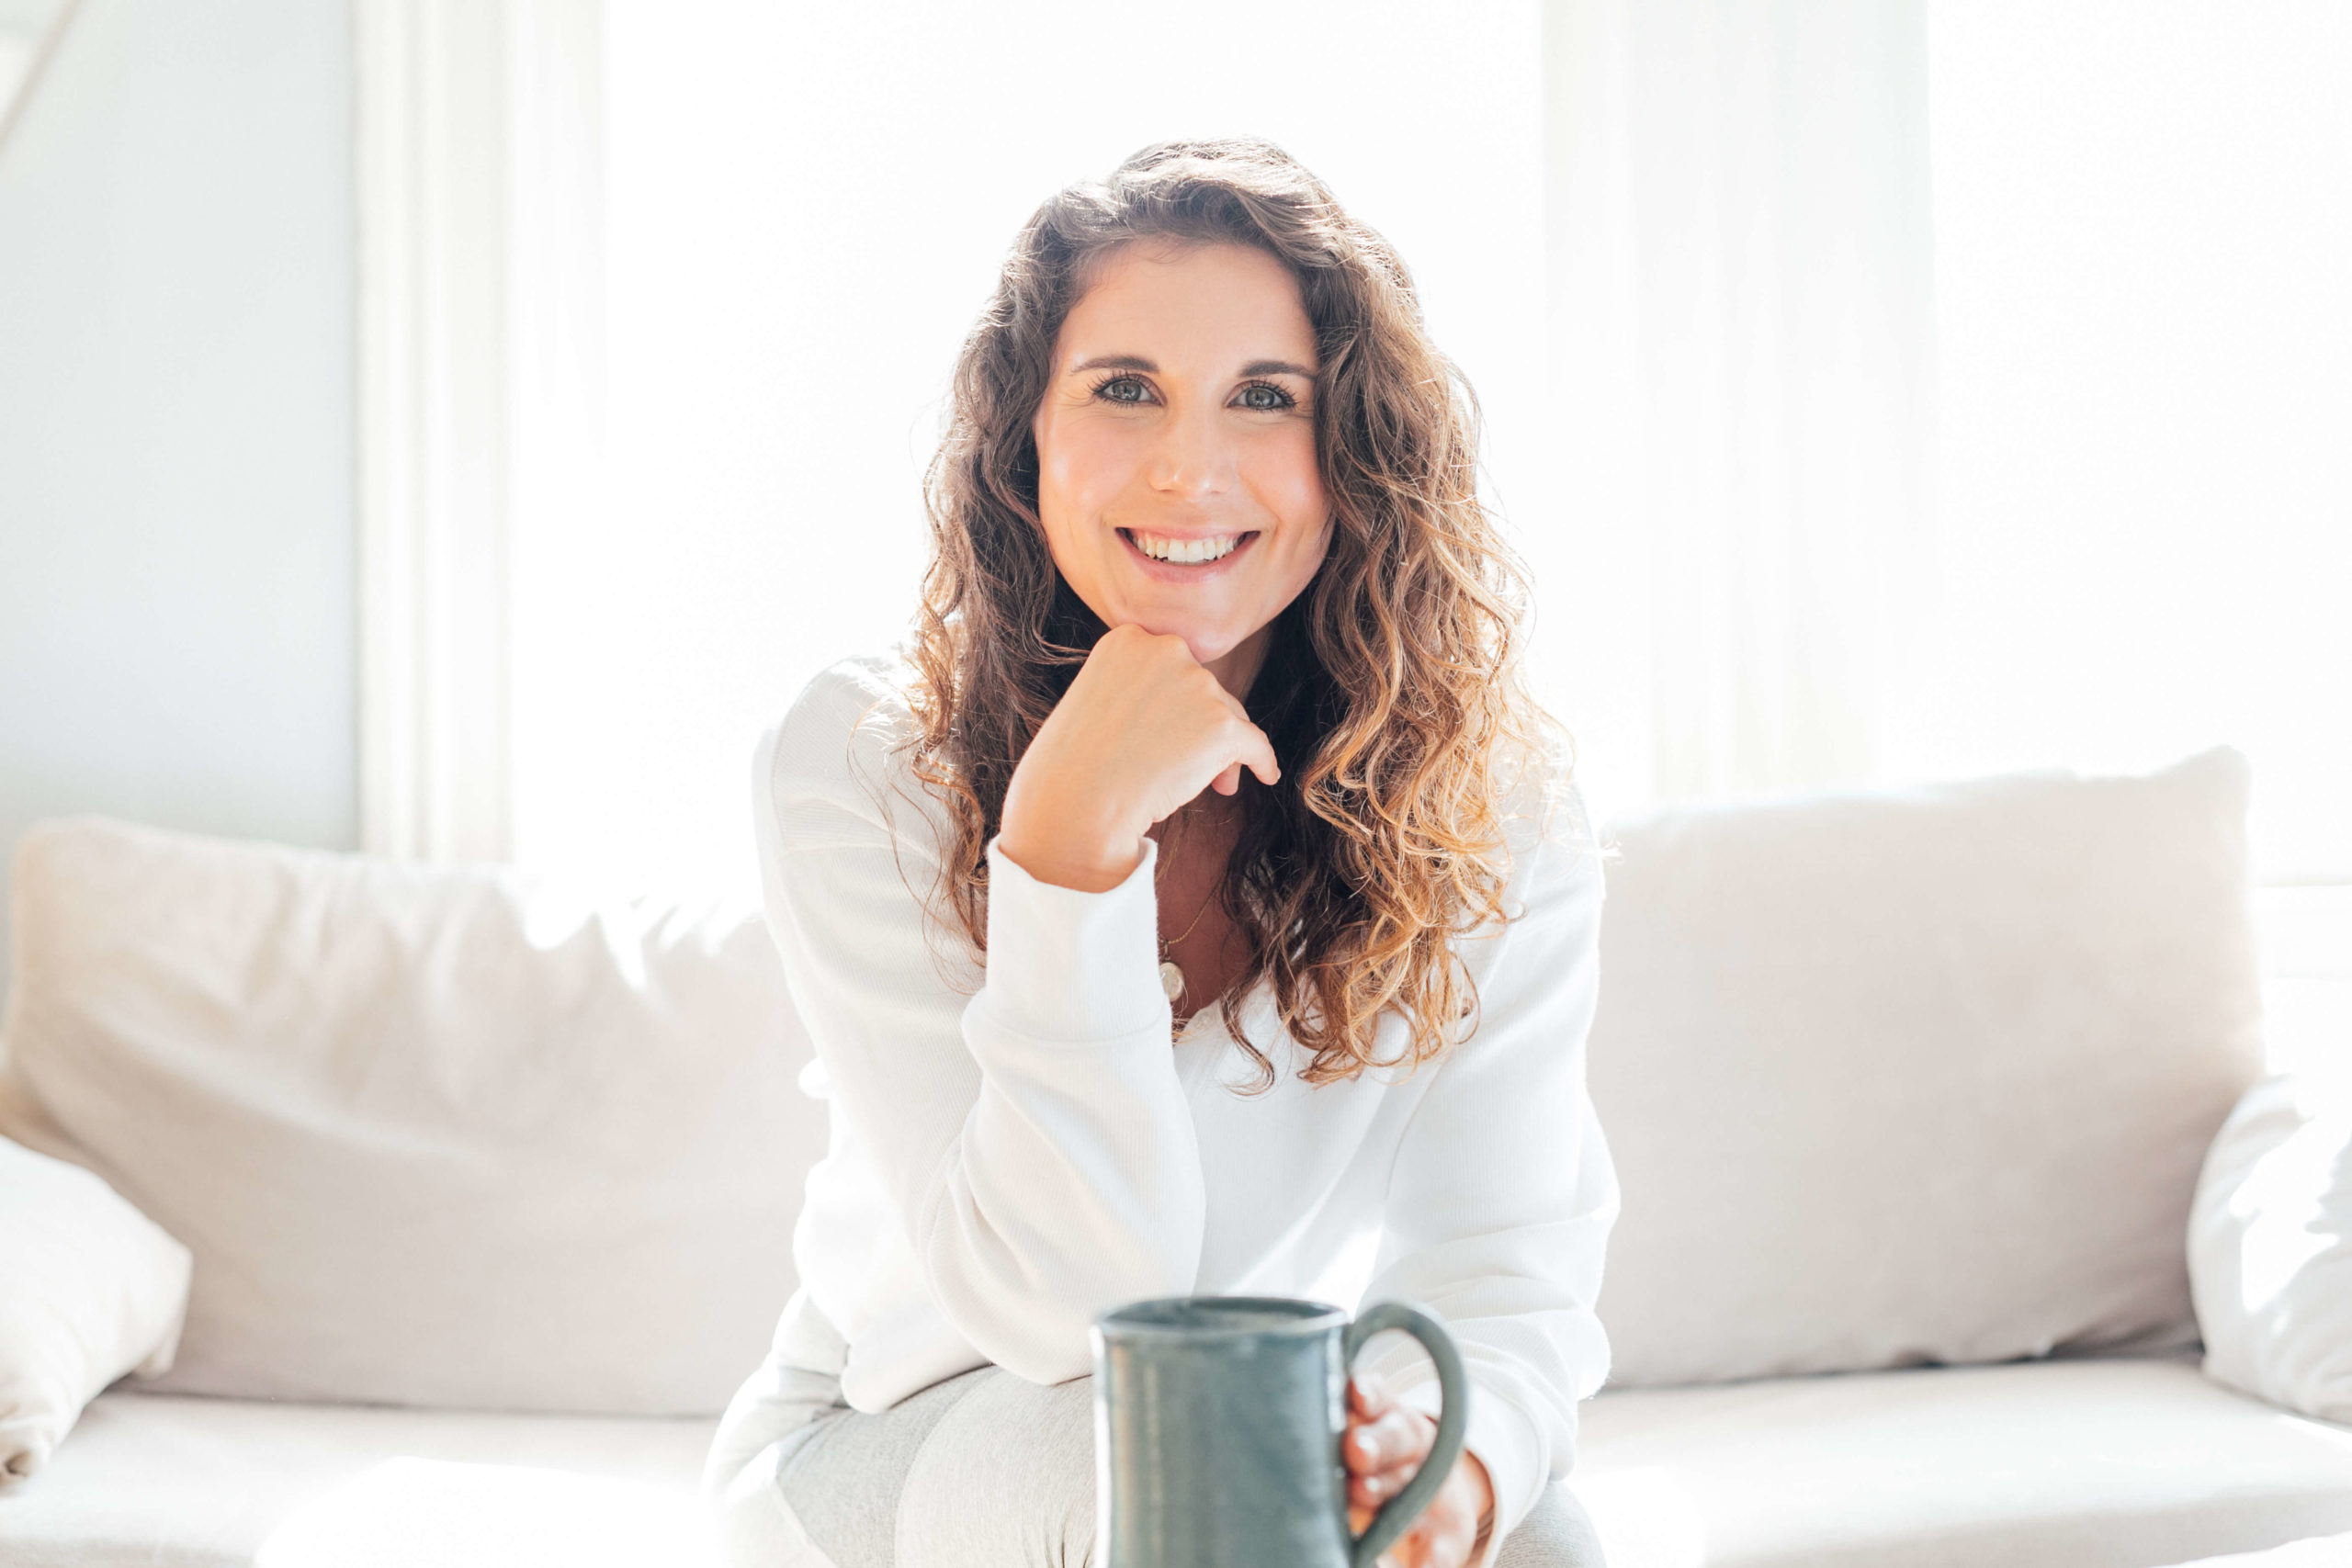 Life coach, Stefani Mccullah poses for a personal branding photoshoot, and shares her tips for how to make your thoughts work for you.